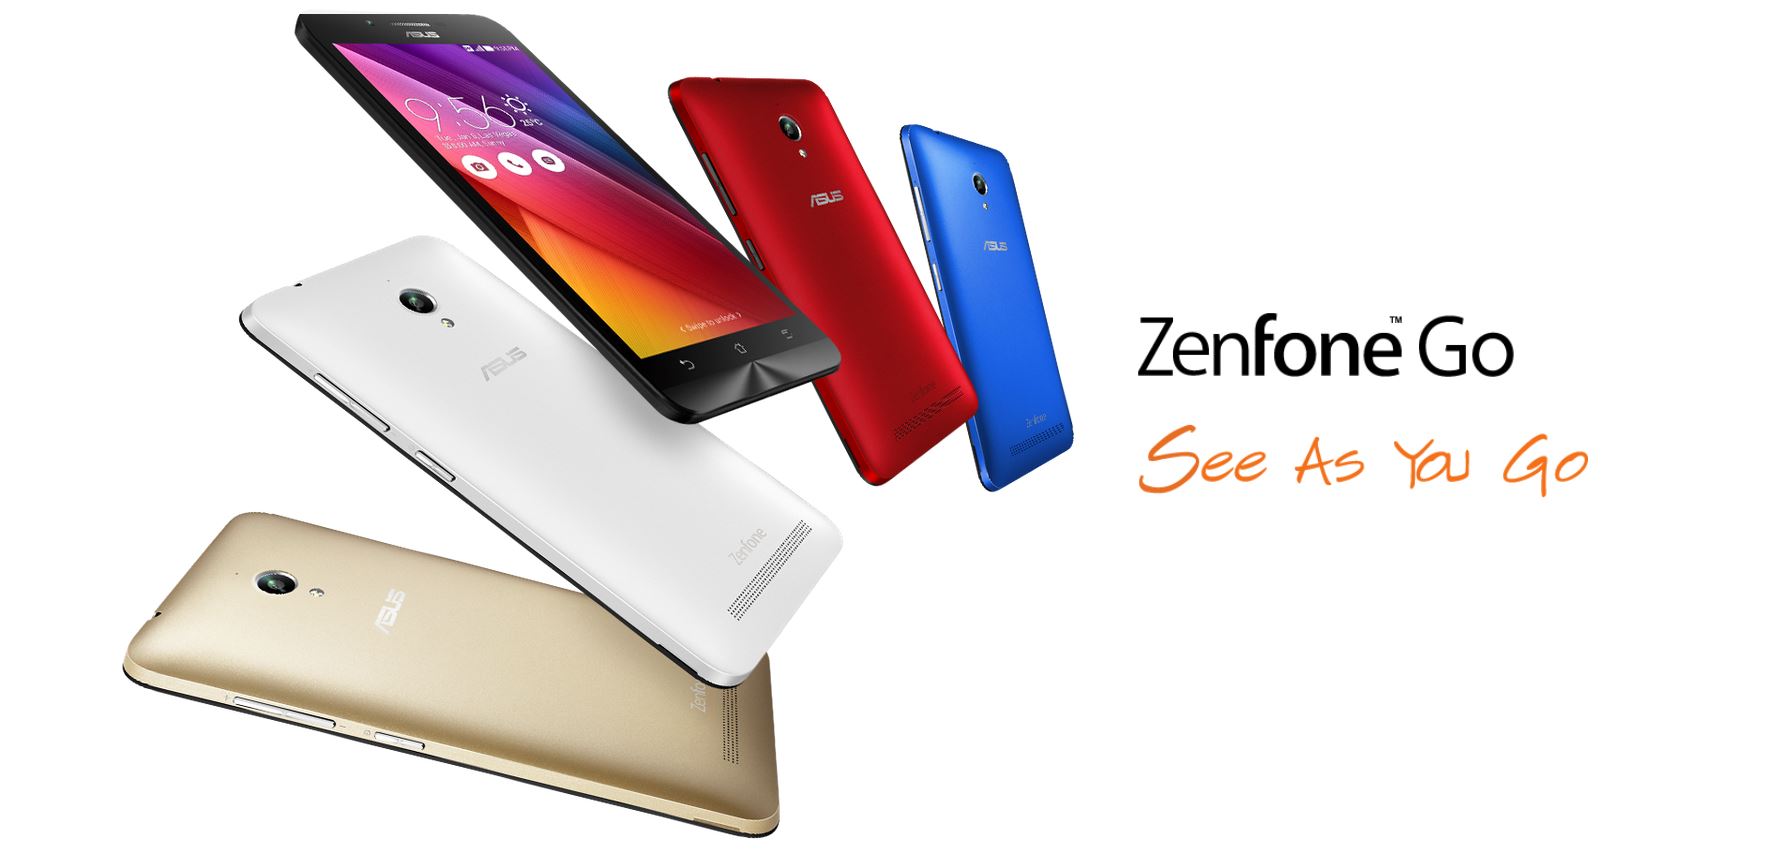 ASUS Zenfone GO is now available in ASUS MY store 30